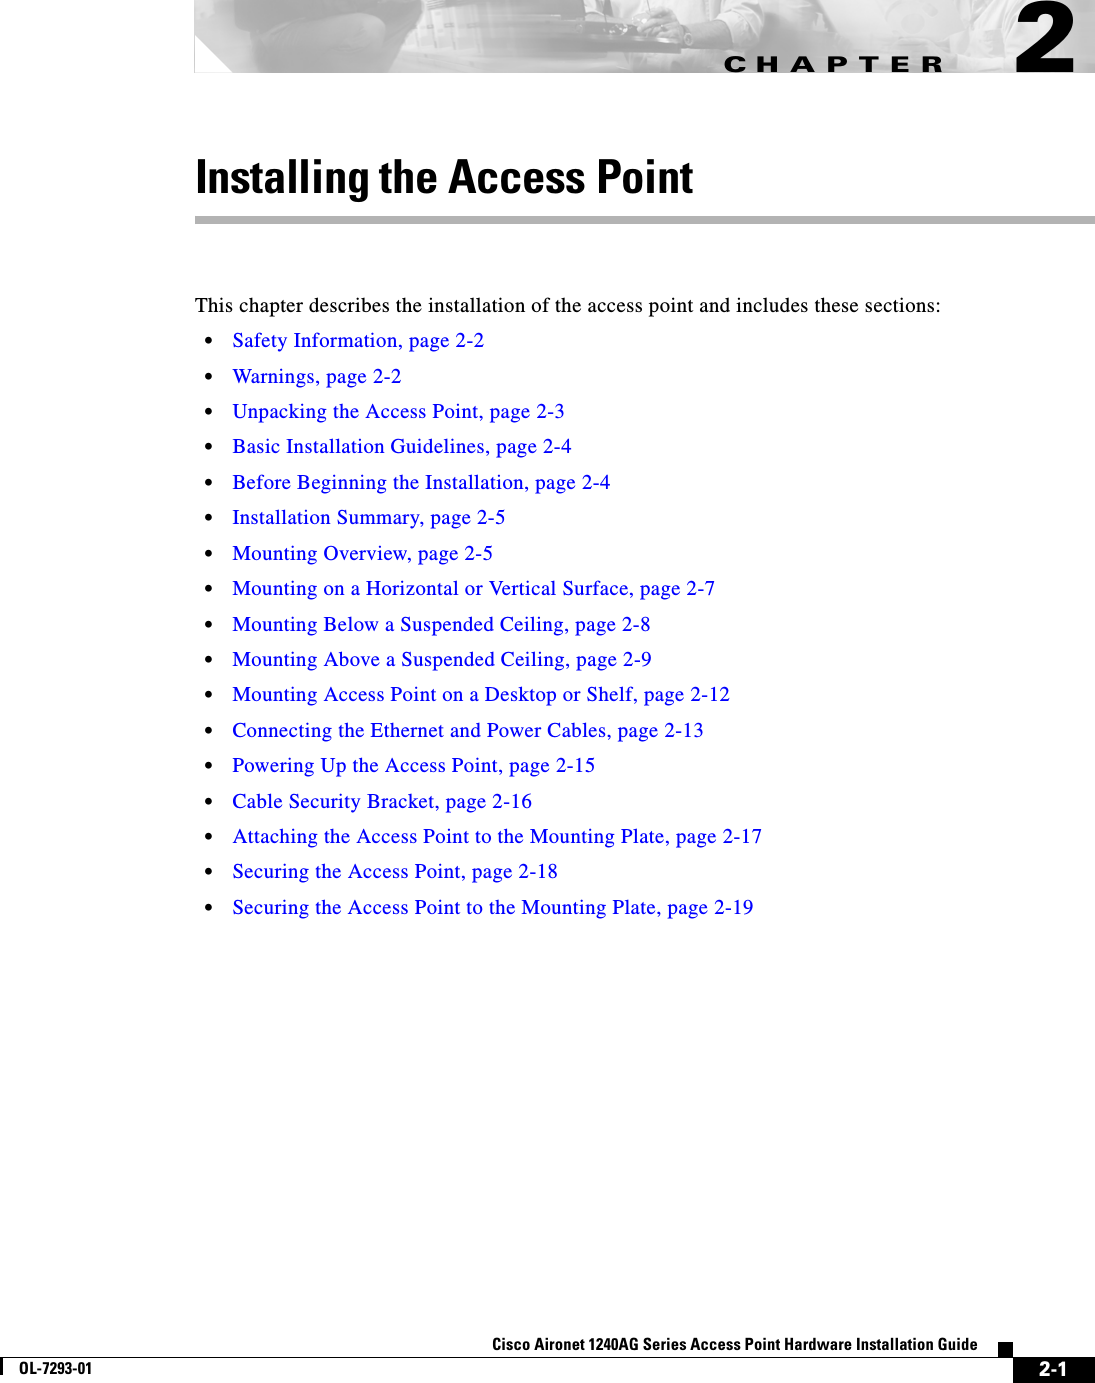 CHAPTER 2-1Cisco Aironet 1240AG Series Access Point Hardware Installation GuideOL-7293-012Installing the Access PointThis chapter describes the installation of the access point and includes these sections:•Safety Information, page 2-2•Warnings, page 2-2•Unpacking the Access Point, page 2-3•Basic Installation Guidelines, page 2-4•Before Beginning the Installation, page 2-4•Installation Summary, page 2-5•Mounting Overview, page 2-5•Mounting on a Horizontal or Vertical Surface, page 2-7•Mounting Below a Suspended Ceiling, page 2-8•Mounting Above a Suspended Ceiling, page 2-9•Mounting Access Point on a Desktop or Shelf, page 2-12•Connecting the Ethernet and Power Cables, page 2-13•Powering Up the Access Point, page 2-15•Cable Security Bracket, page 2-16•Attaching the Access Point to the Mounting Plate, page 2-17•Securing the Access Point, page 2-18•Securing the Access Point to the Mounting Plate, page 2-19